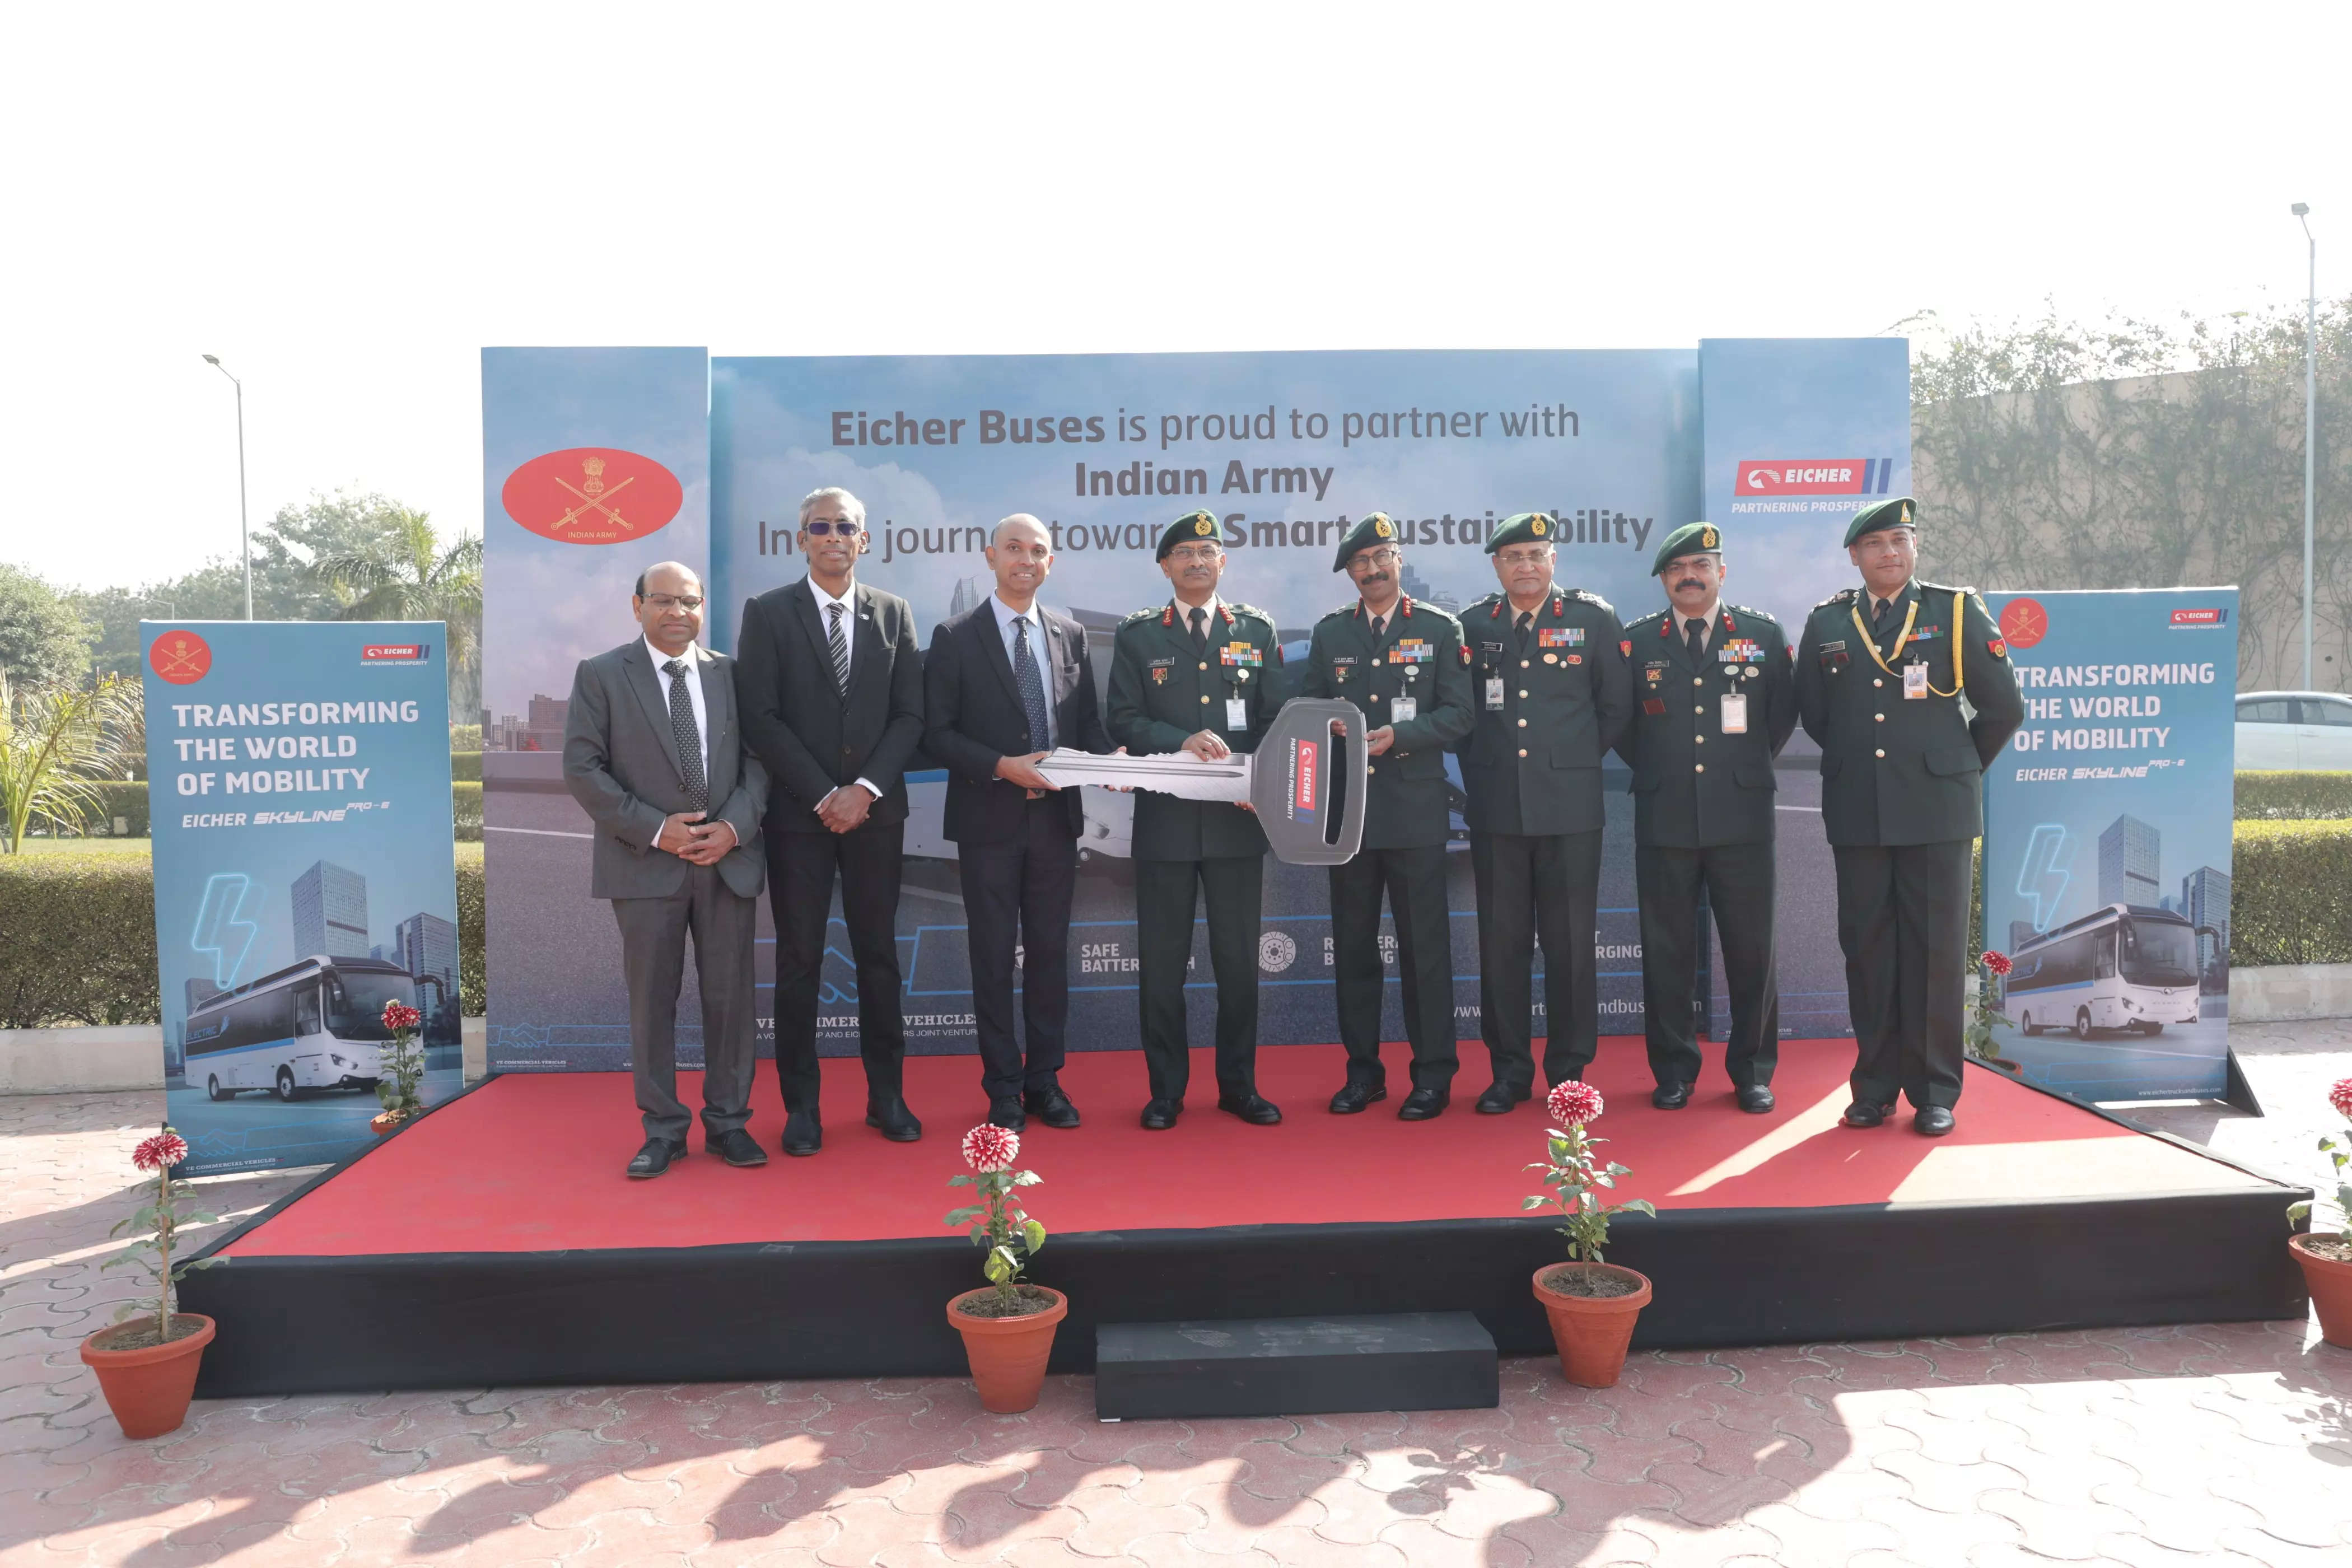 <p>These deliveries support the Indian Army’s transformative initiative to deploy environment friendly and sustainable transportation for staff and troop movement.</p>